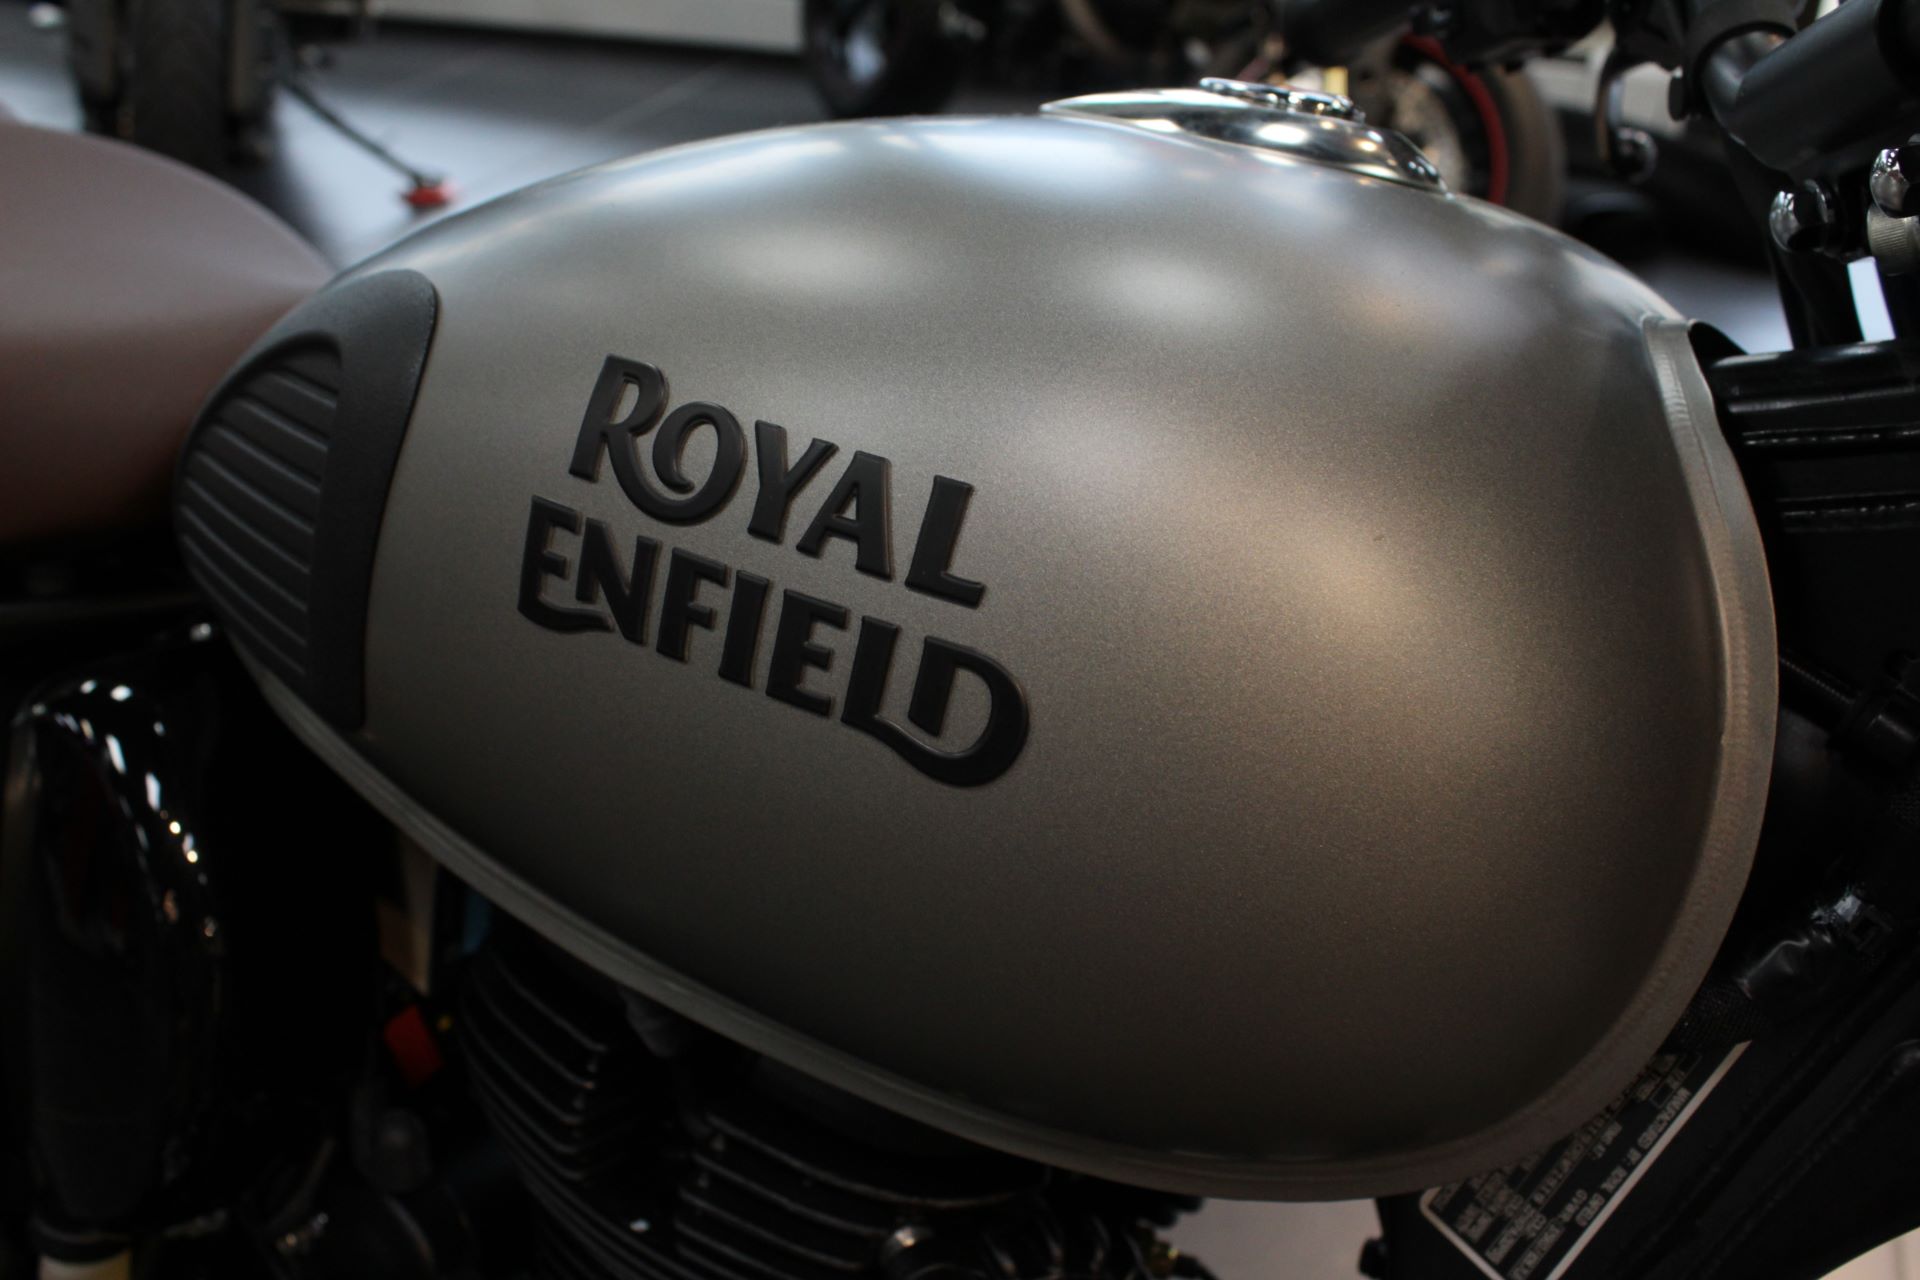 2022 Royal Enfield Classic 350 in West Allis, Wisconsin - Photo 3